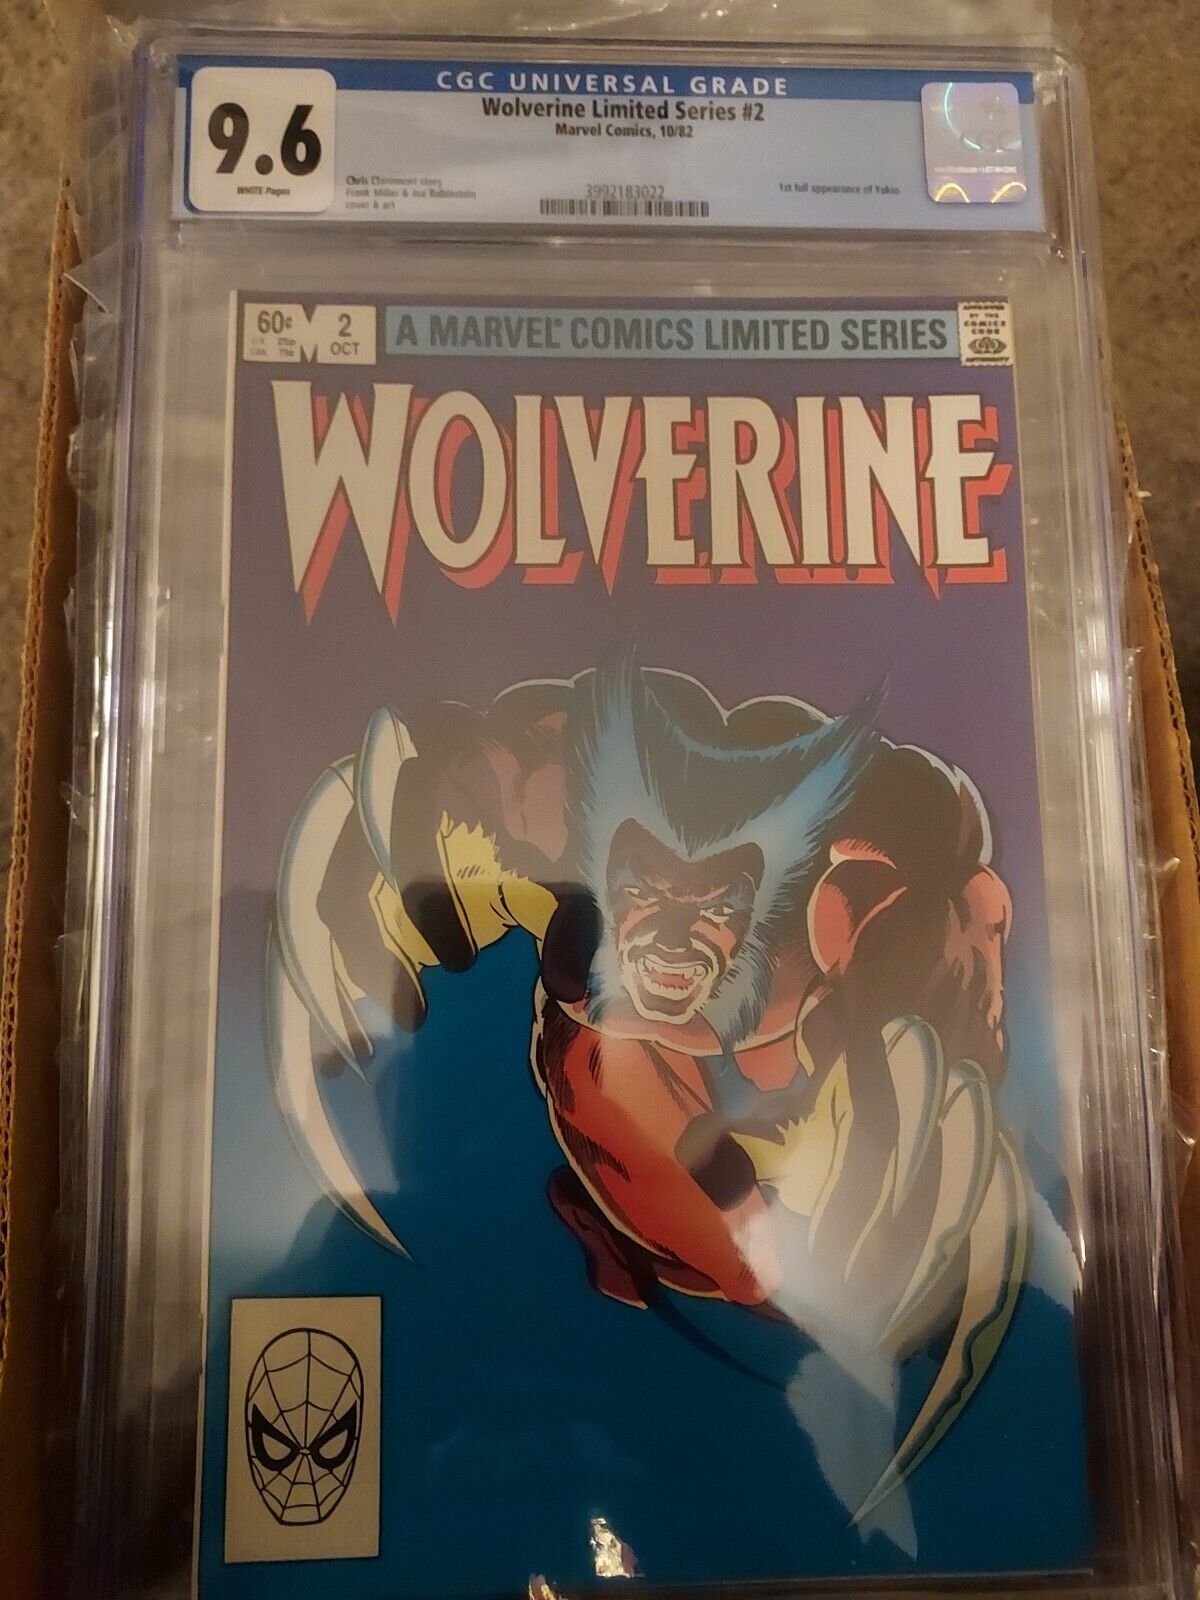 Wolverine Limited Series #2 CGC 9.6 White pages - F. Miller 1982 - 4371136020